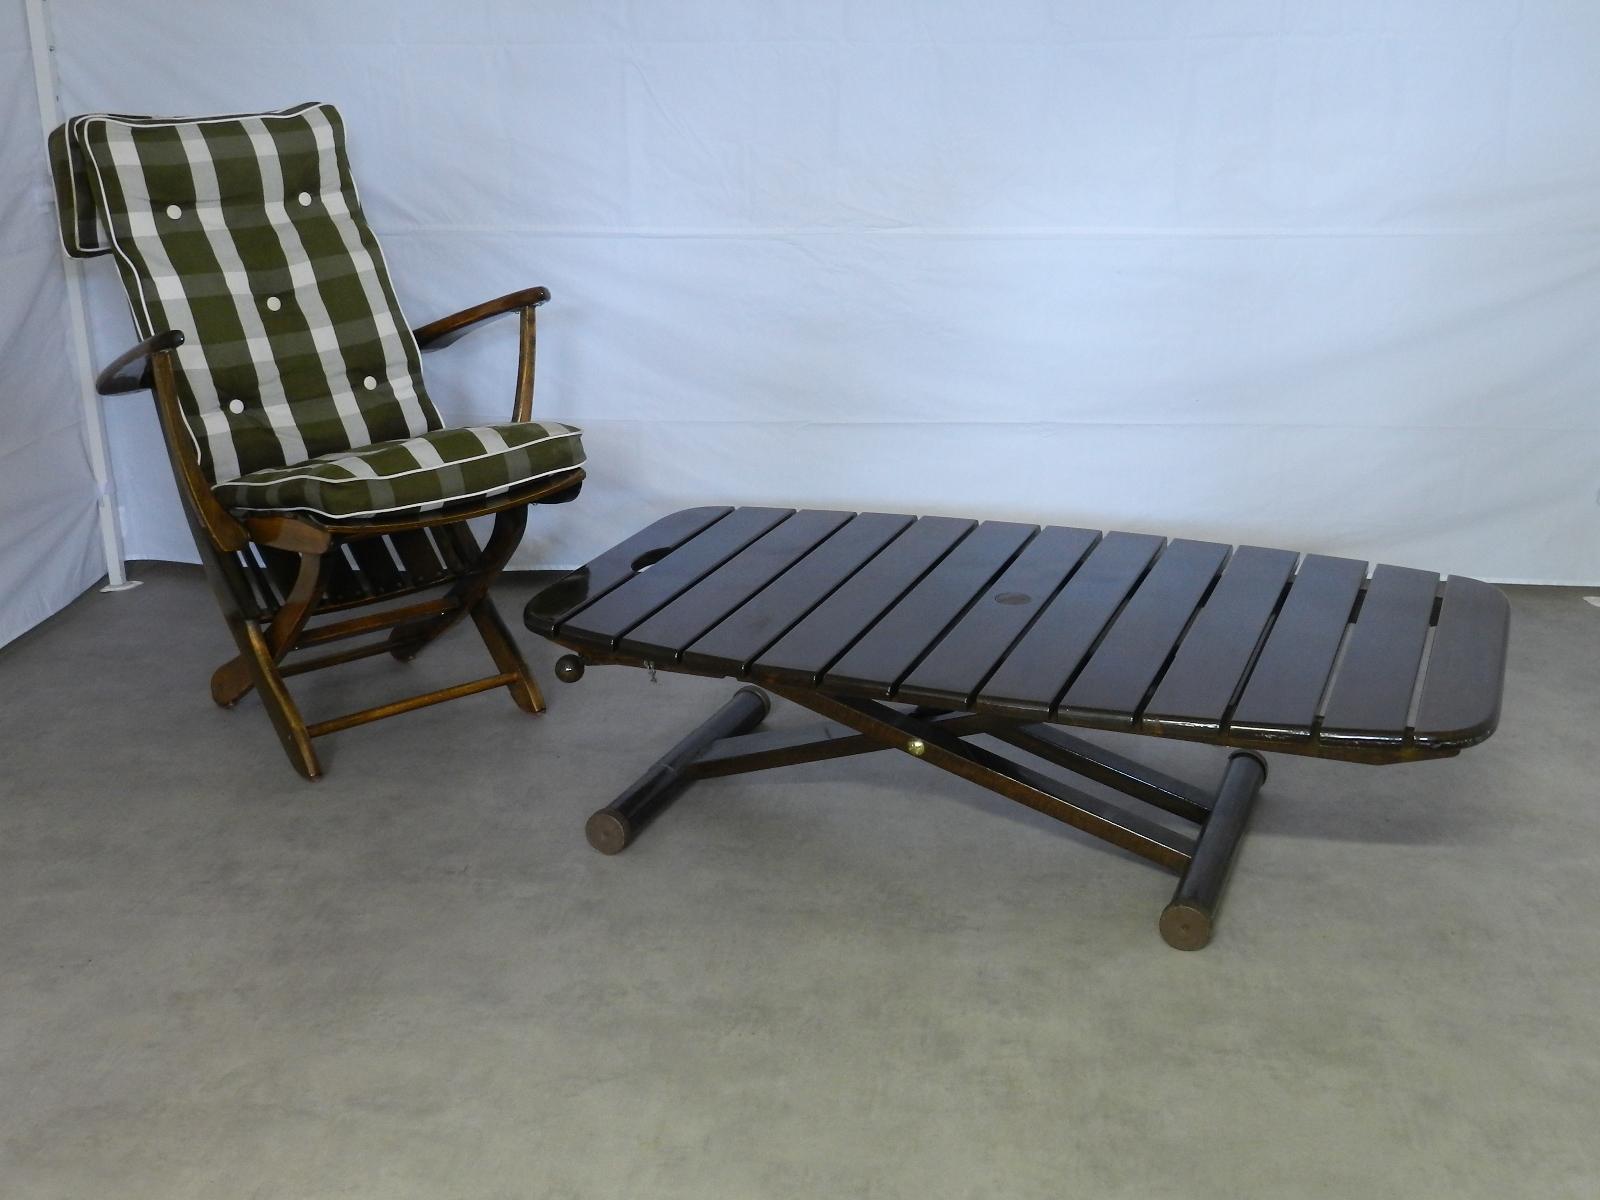 Midcentury French Adjustable Patio or Garden Lounger Sofa Bench by Clairitex 2